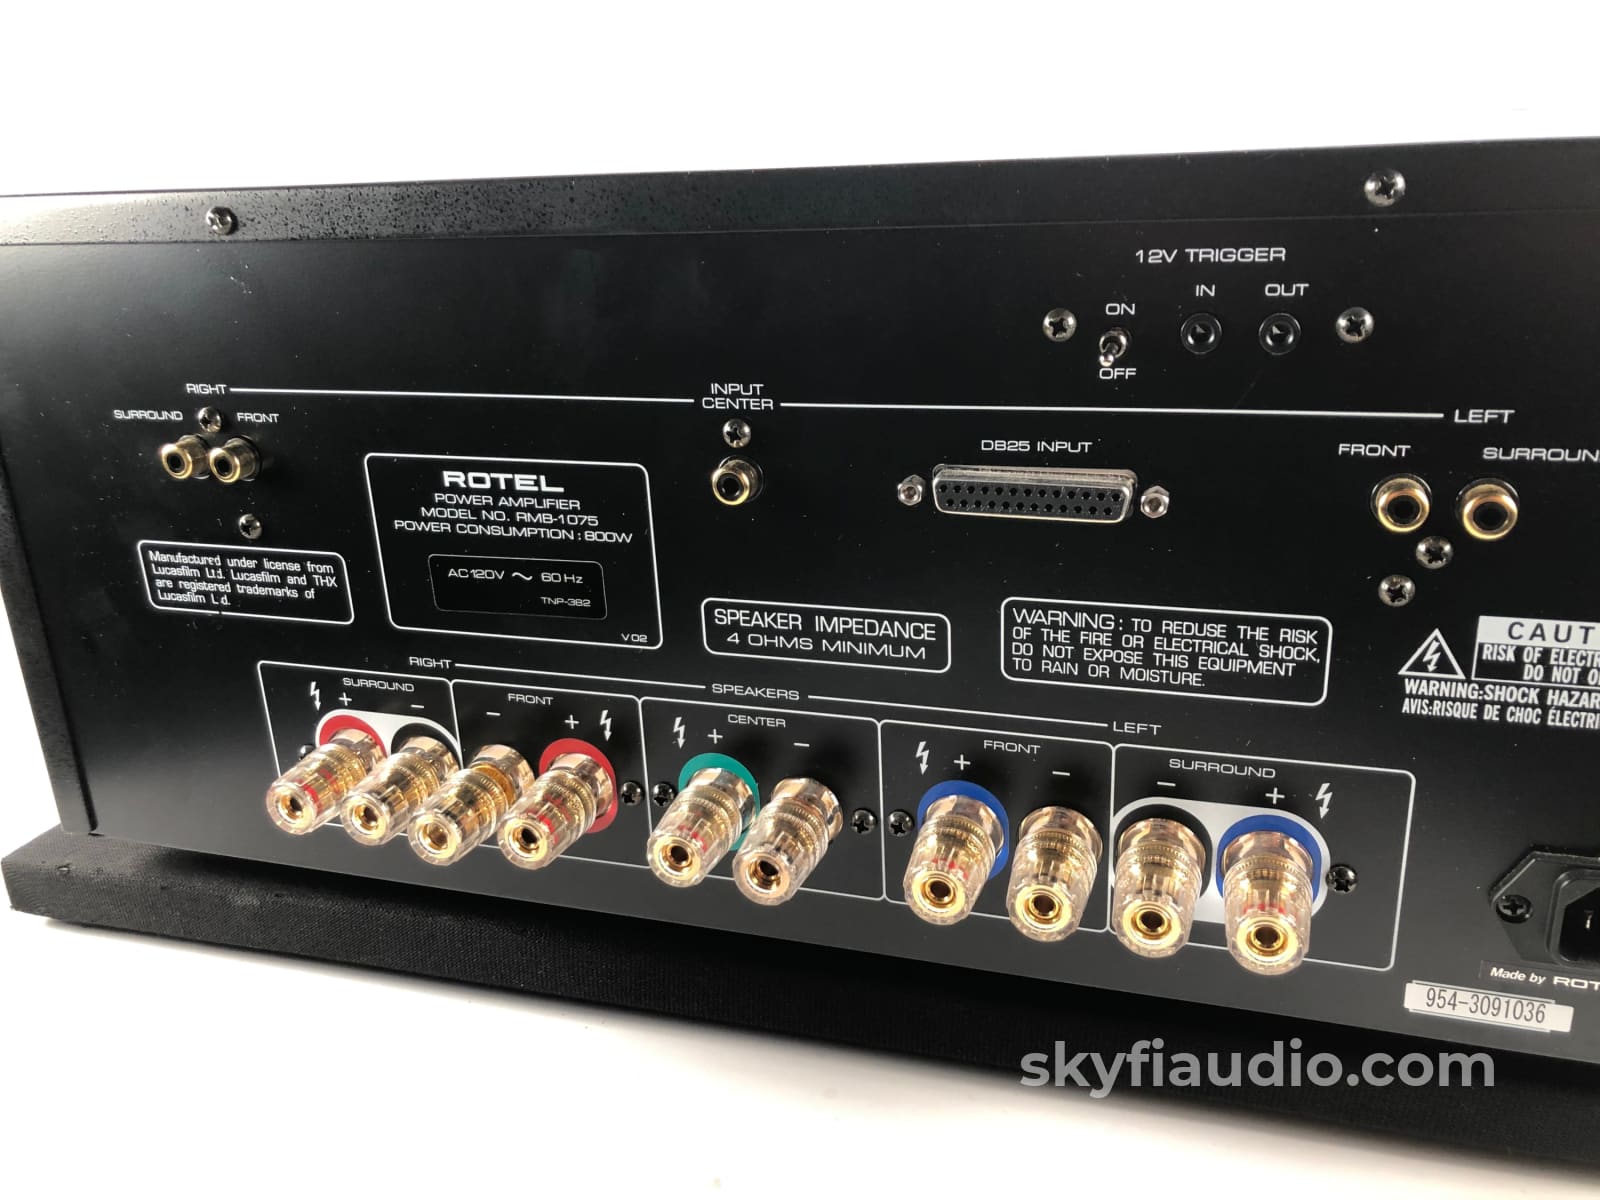 Rotel Rmb-1075 High Current Five Channel Home Theater Amplifier